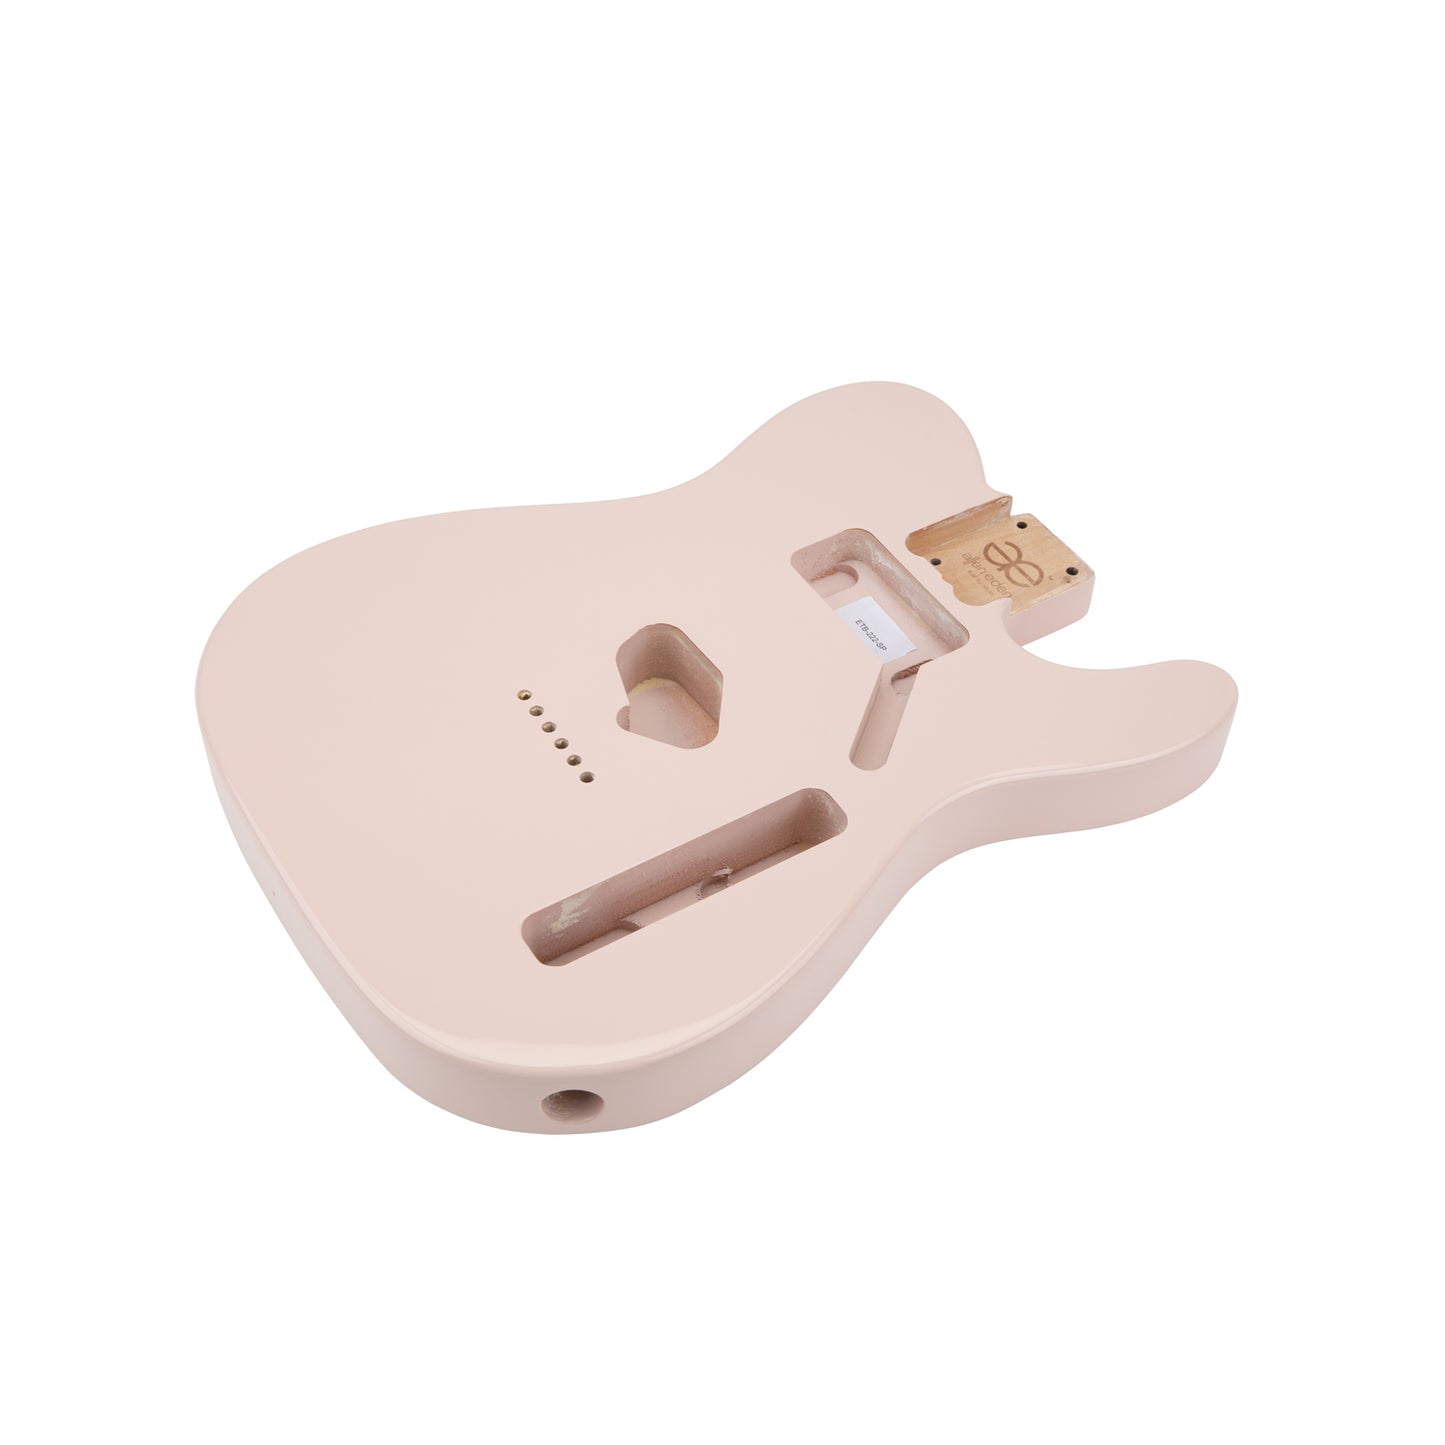 AE Guitars® T-Style Alder Replacement Guitar Body Shell Pink